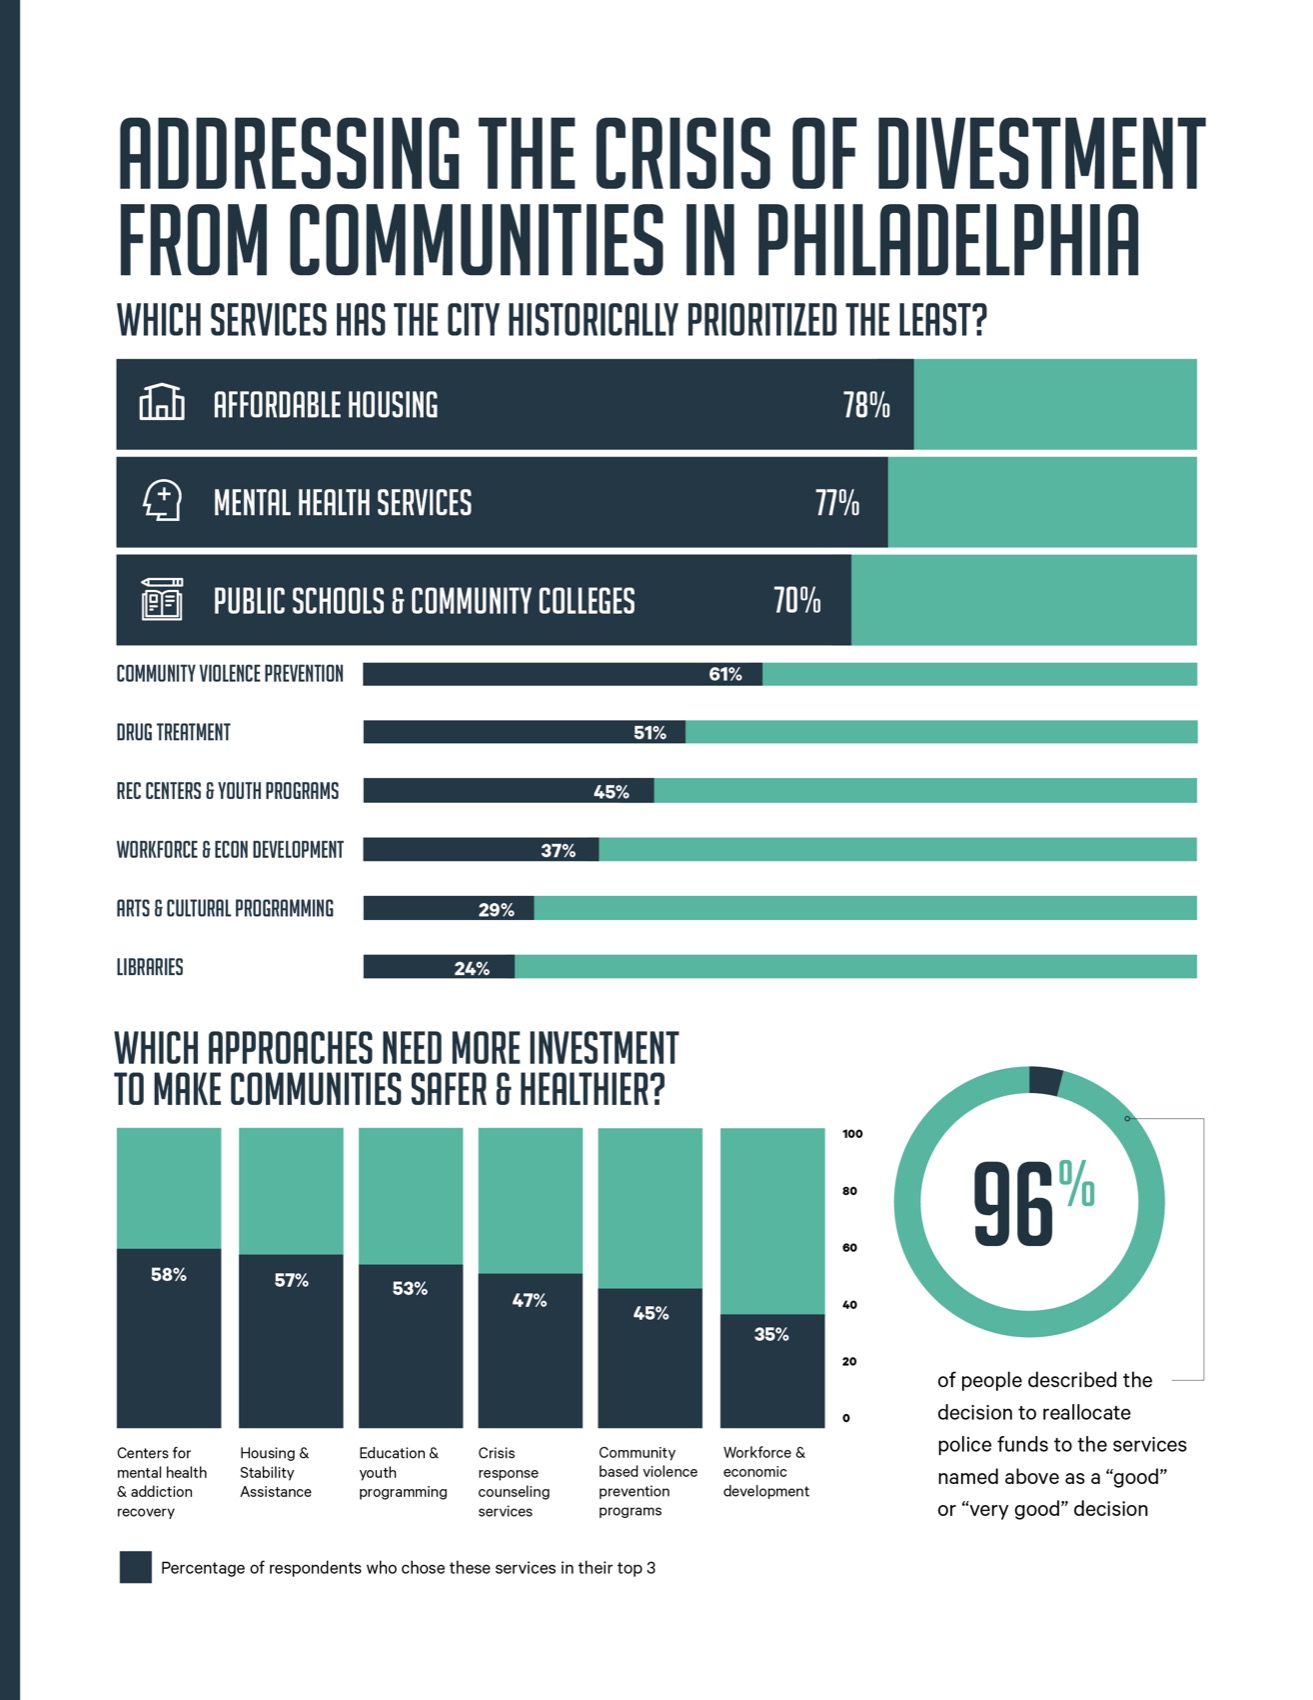 an infographic contains information about what city services have historically been underinvested in